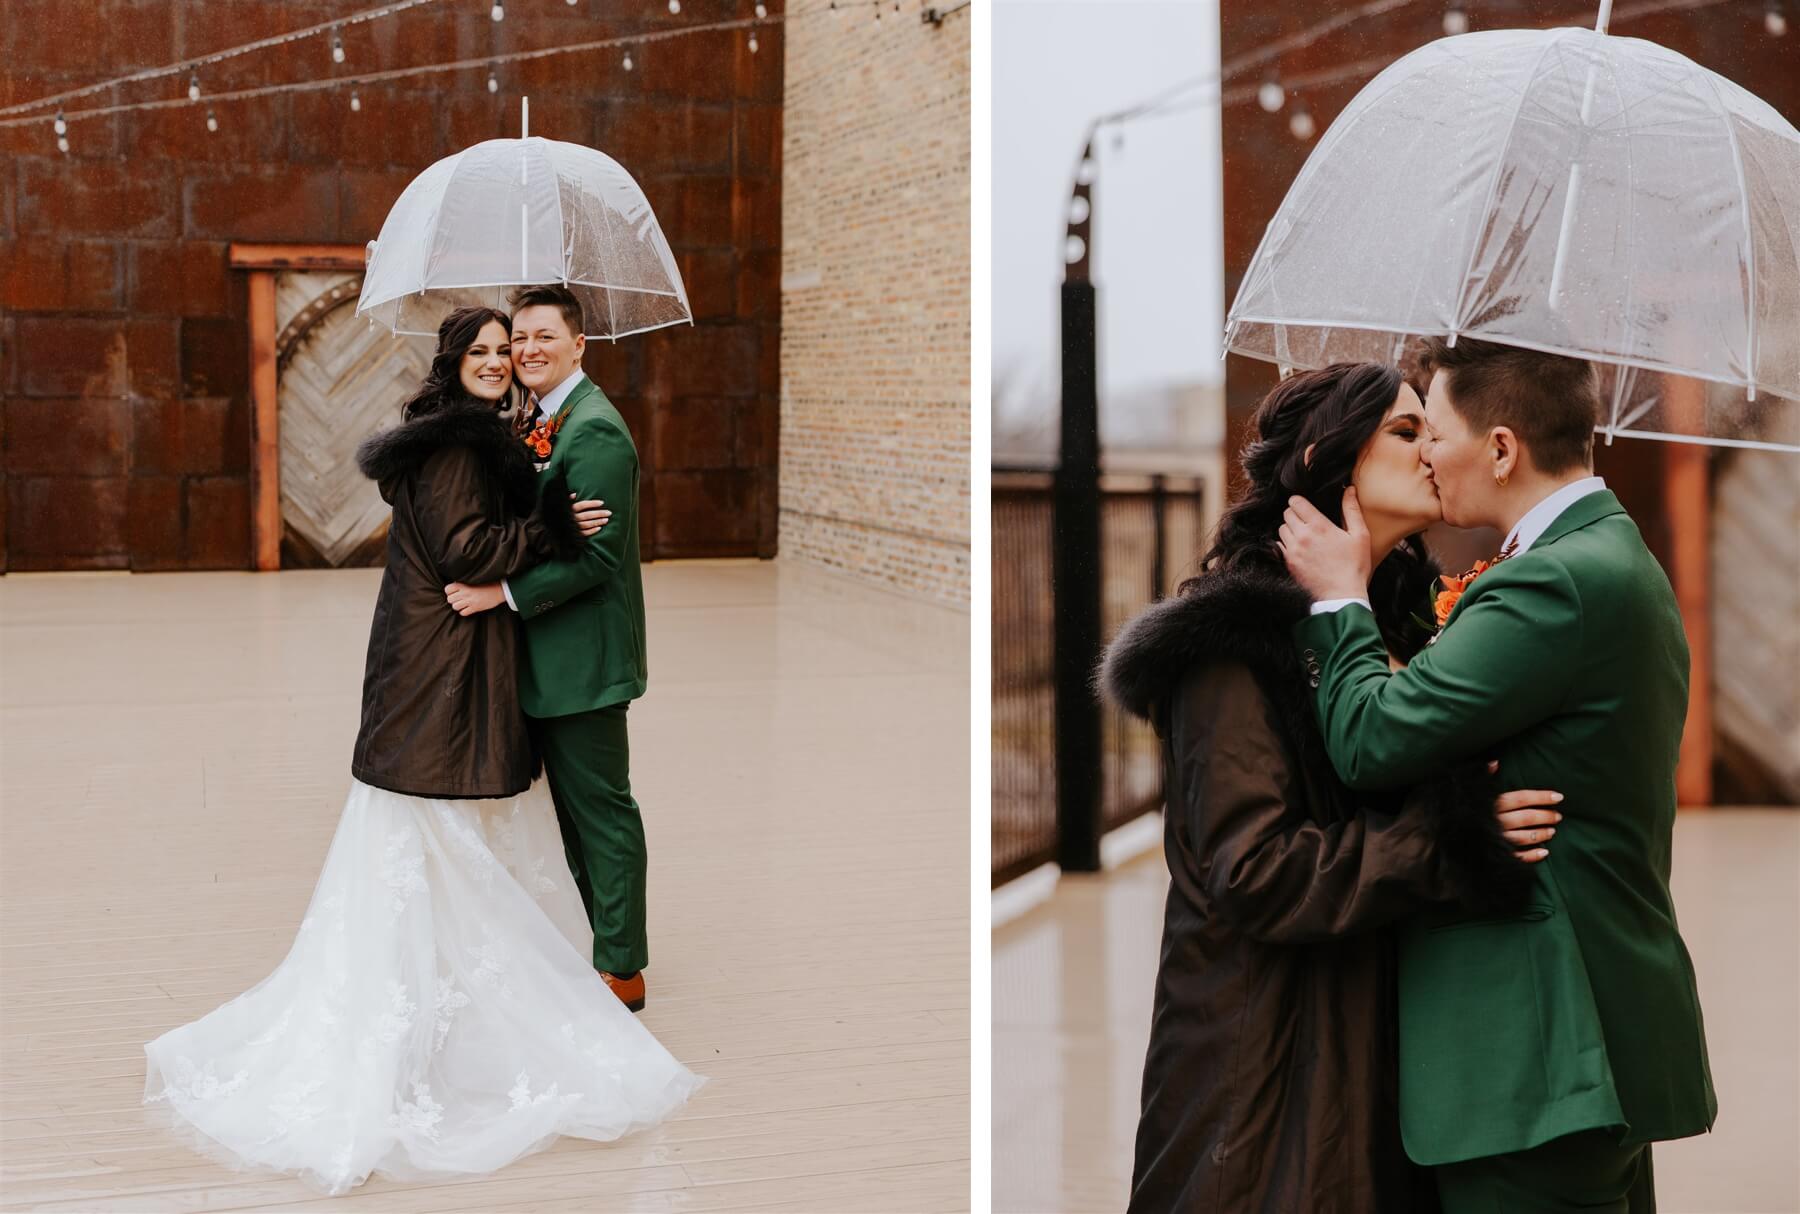 Couple kissing under clear umbrella on wedding day